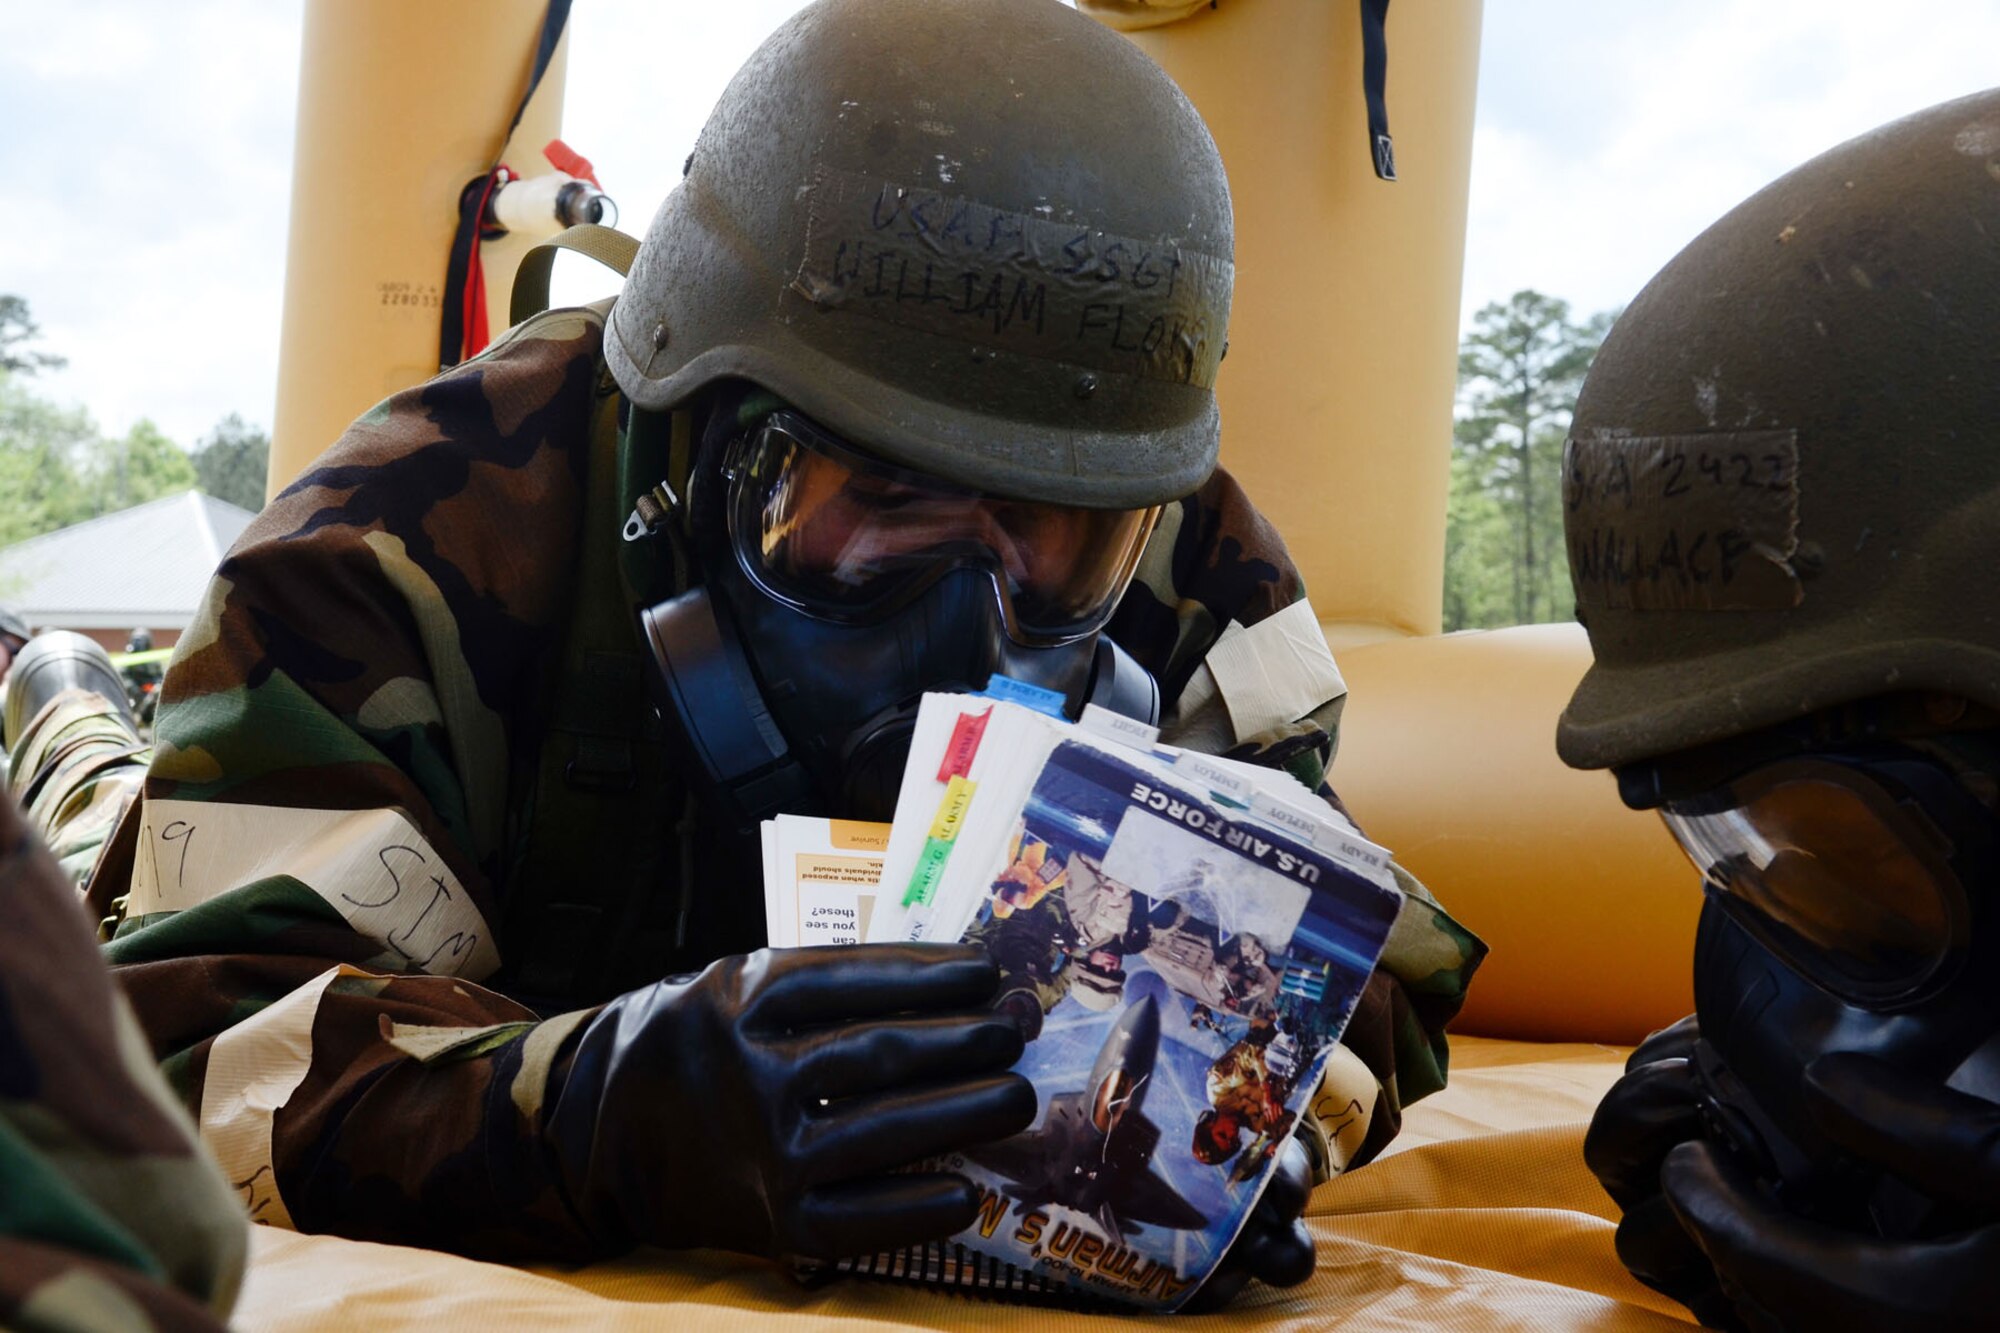 U.S. Air Force Staff Sgt. William Floyd, assigned to the 169th Fighter Wing of the South Carolina Air National Guard, reads his Airman's Manual during a simulated chemical attack during the 169th Fighter Wing Readiness Exercise, McEntire Joint National Guard Base, S.C., April 12, 2013. Members of the 169th Fighter Wing are preparing for a Phase I and II Readiness Inspection, which evaluates a unit's ability to deploy, then operate and launch missions in a chemical combat environment.  (U.S. Air National Guard photo by Staff Sgt. Jorge Intriago/Released)